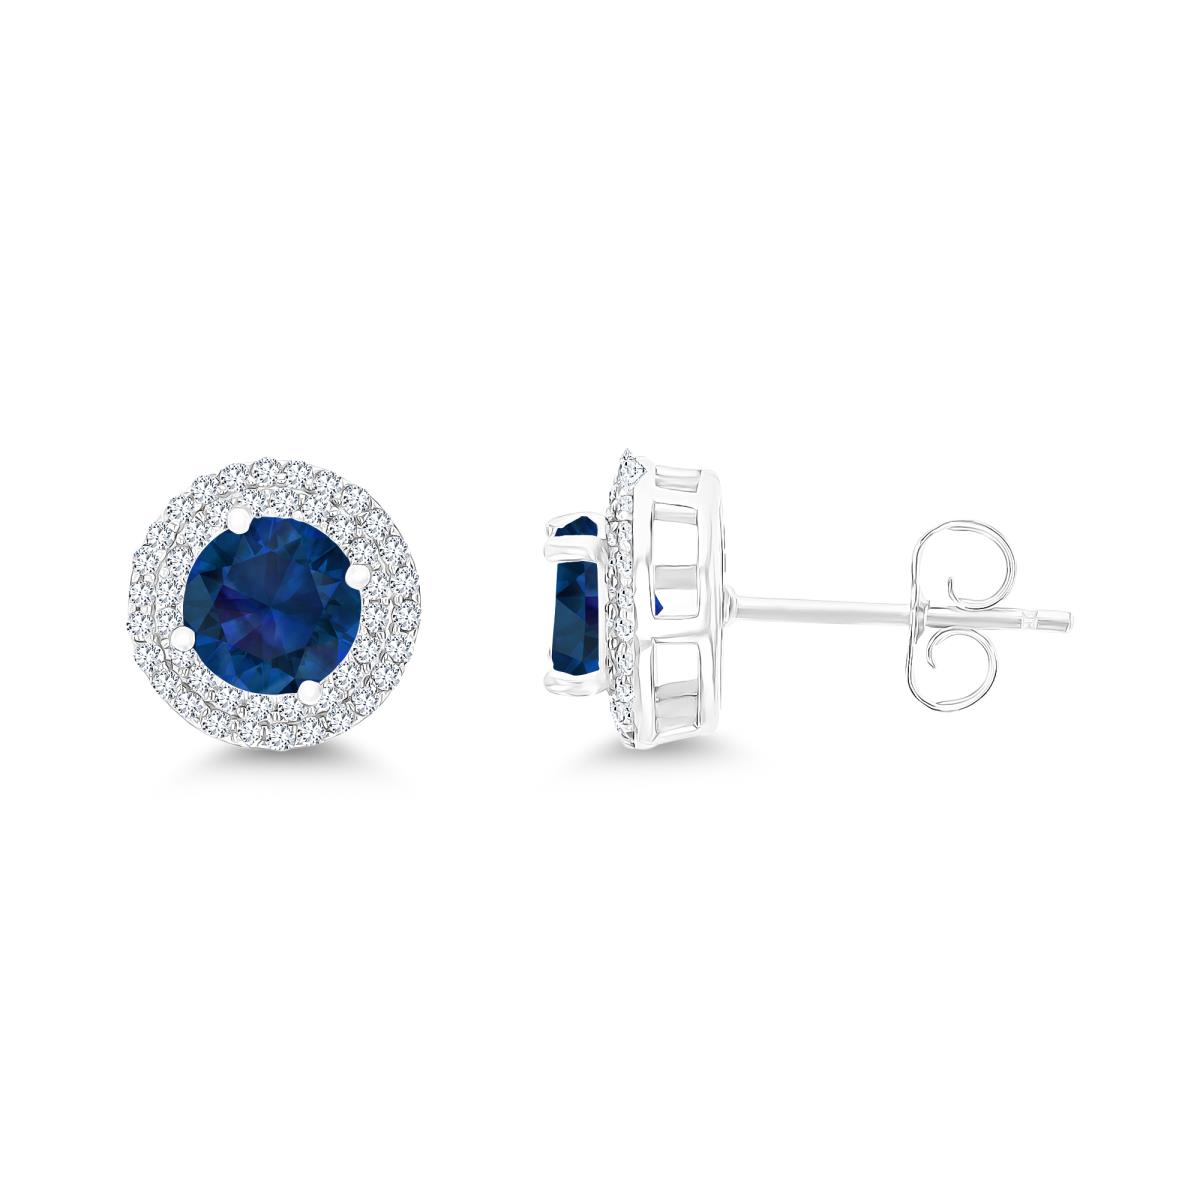 Sterling Silver Rhodium 6mm RD Cr Blue Sapphire / Cr White Sapphire Double Halo Stud Earring